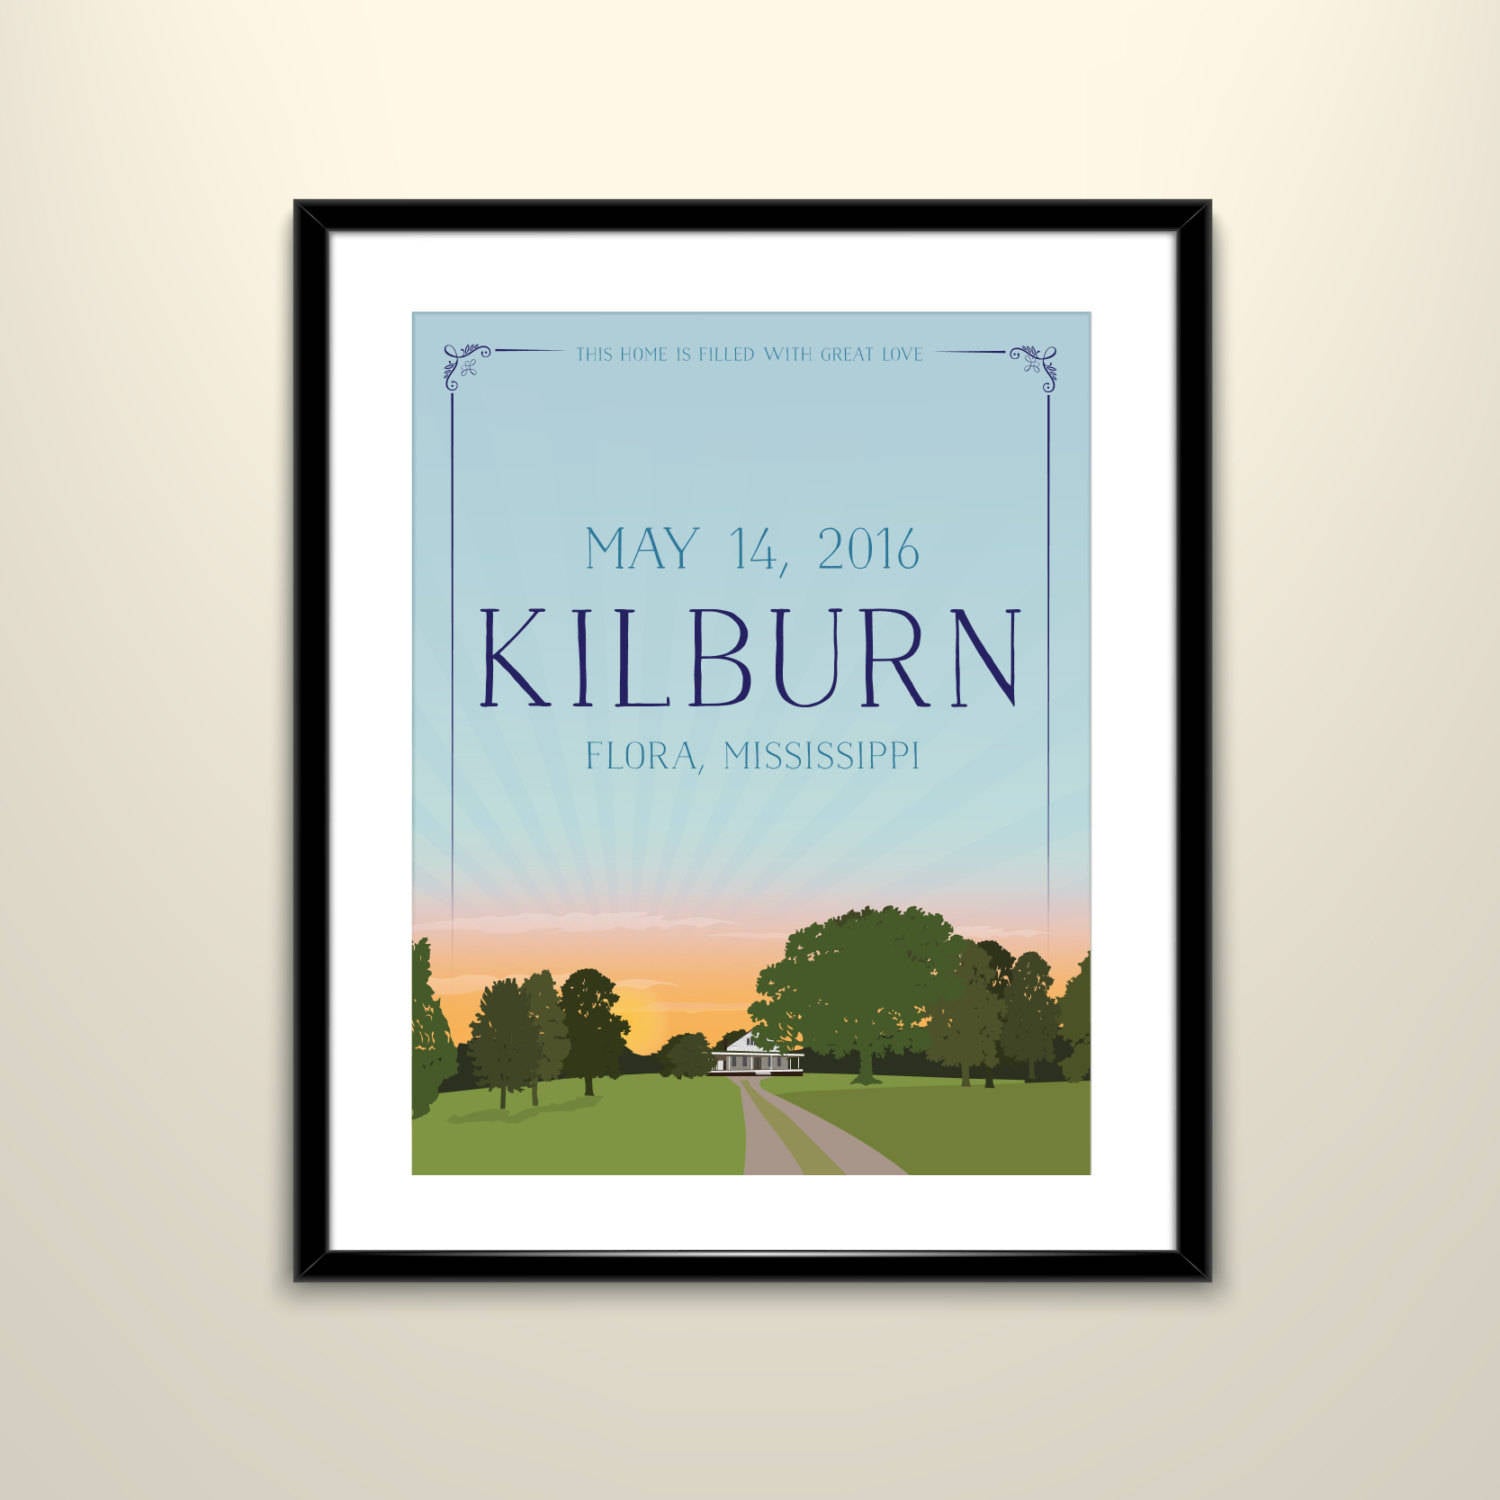 Country Home Sunset Landscape Wedding Travel Poster/11x14 Poster- Personalize with Names and wedding date (frame not included)